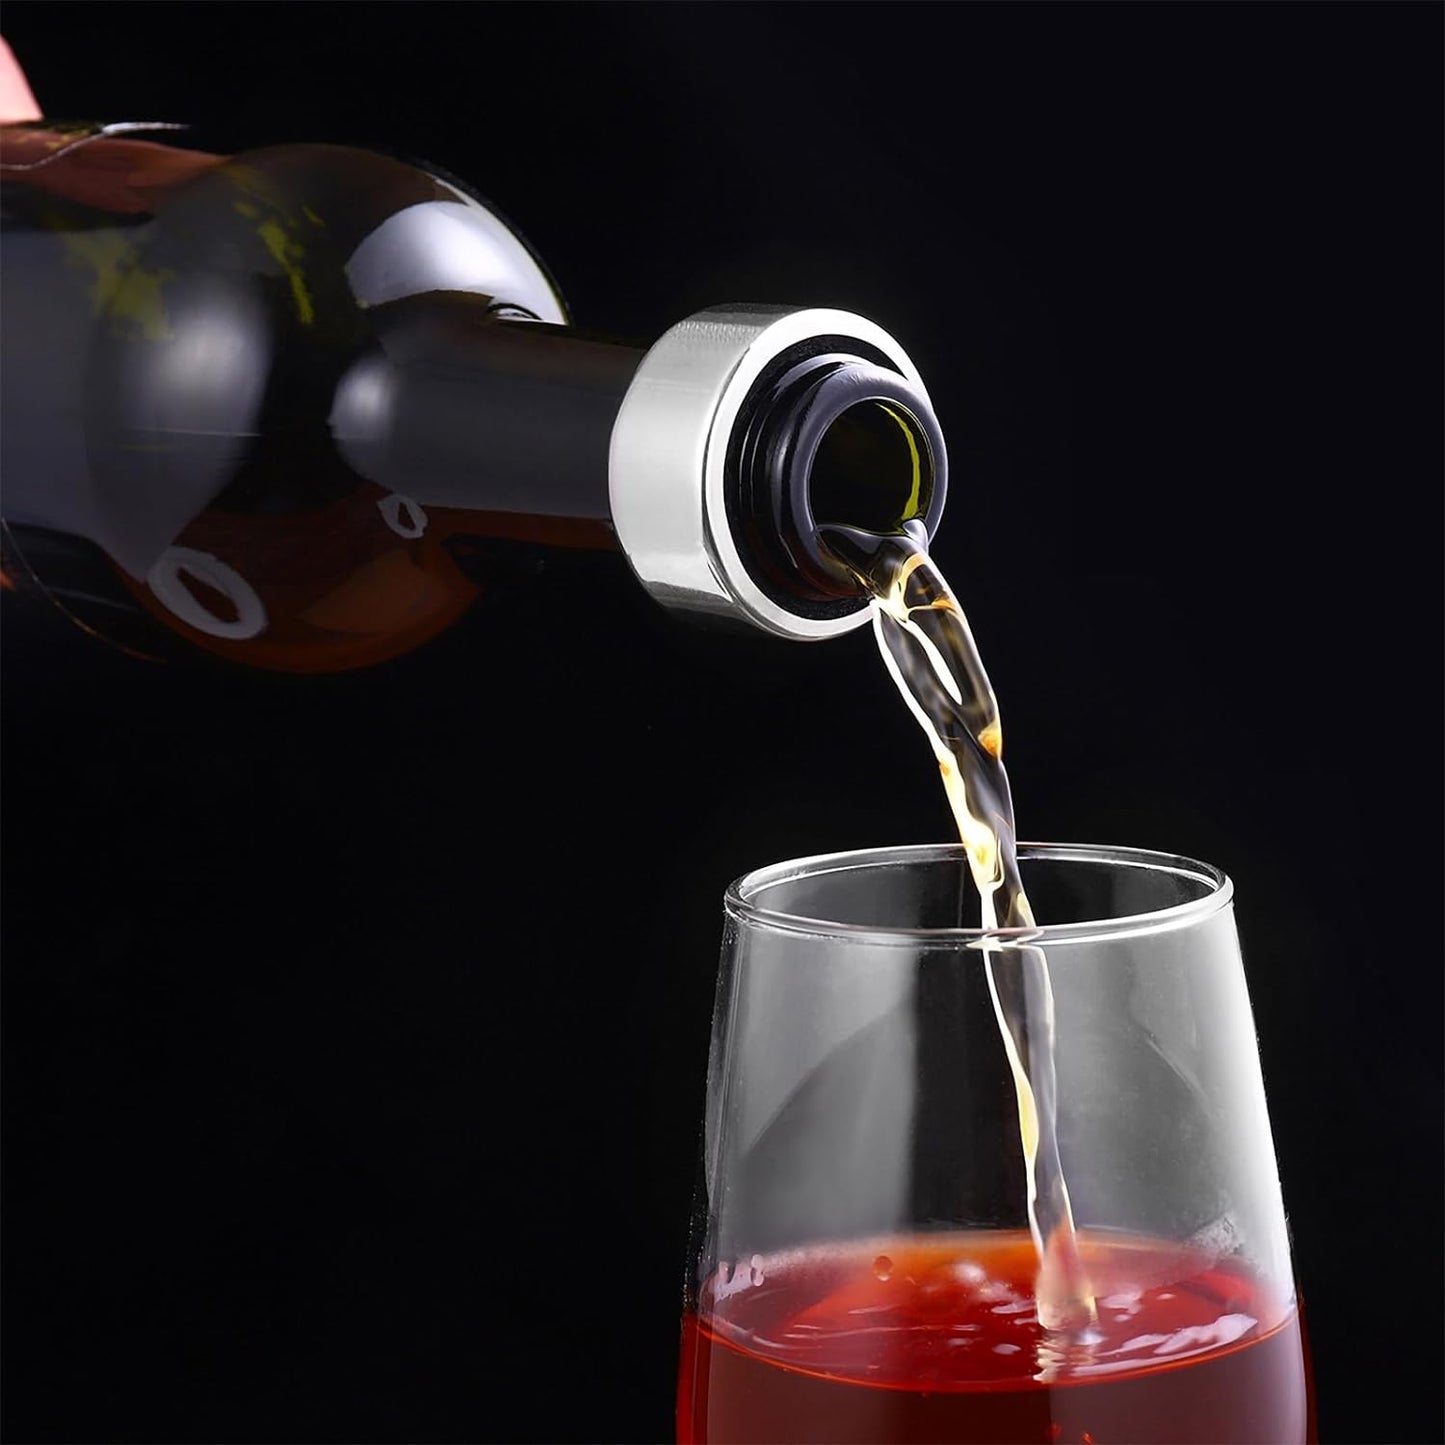 4 pcs Stainless Steel Red Wine Bottle Collar Leak- Proof Anti- Overflow Ring Wine Drip Catcher for Home Bar Restaurant Outdoor Parties (without Stripe)